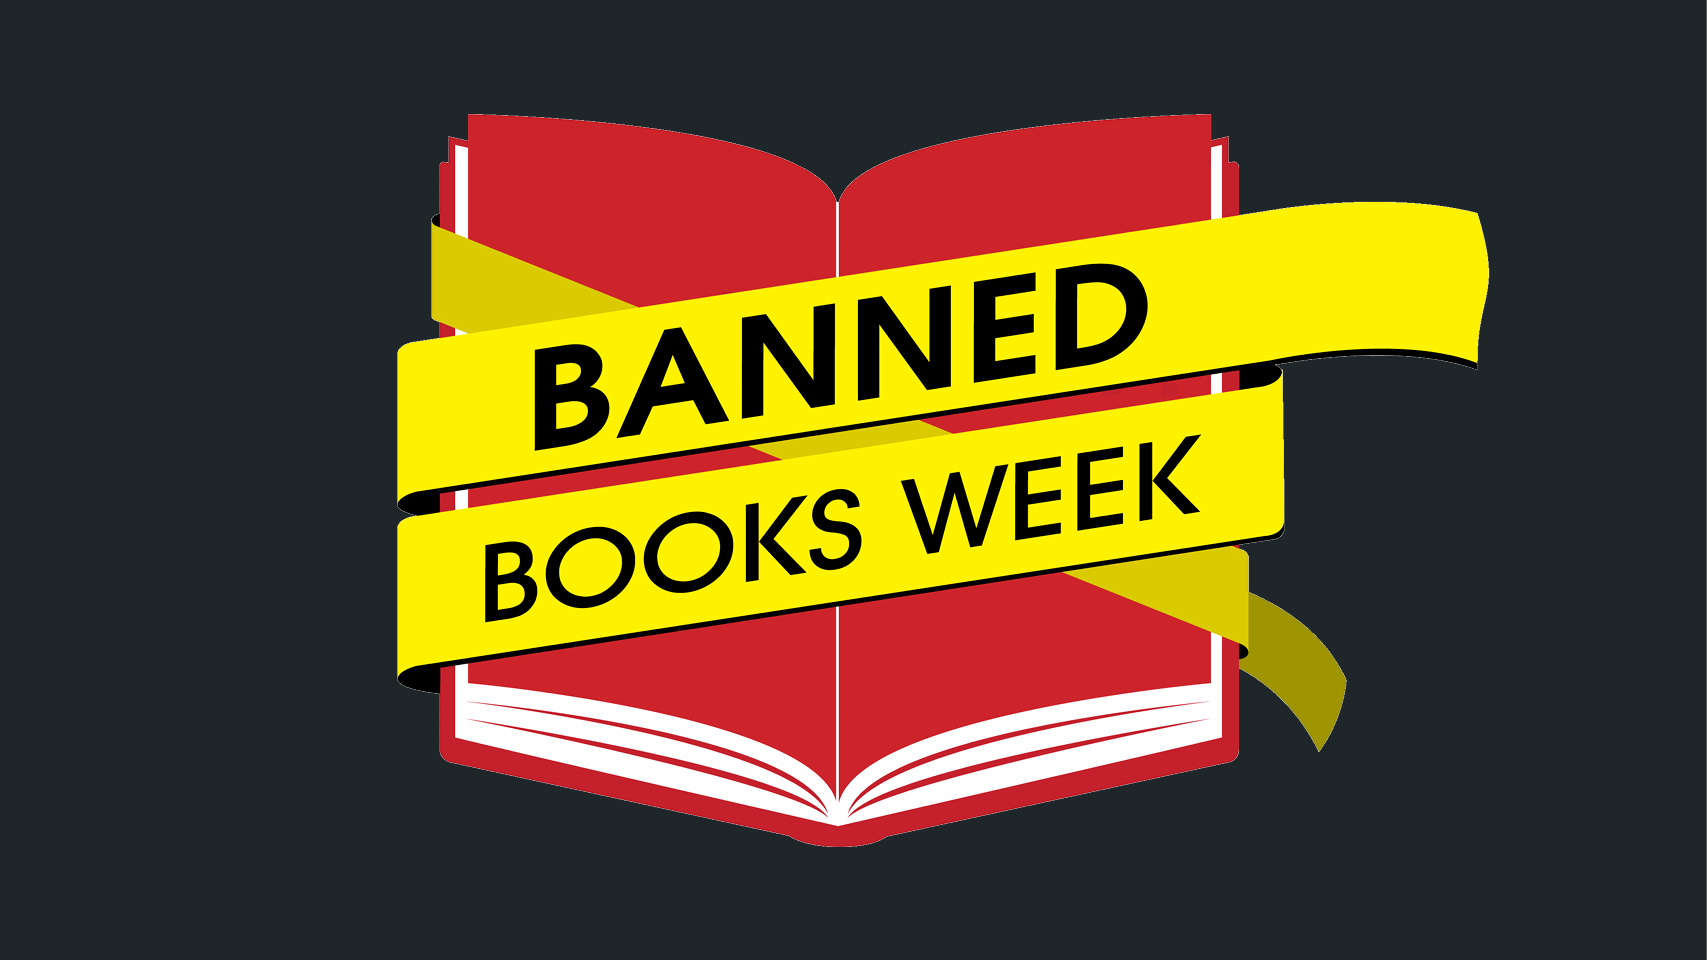 Be part of Banned Books Week with the University Libraries